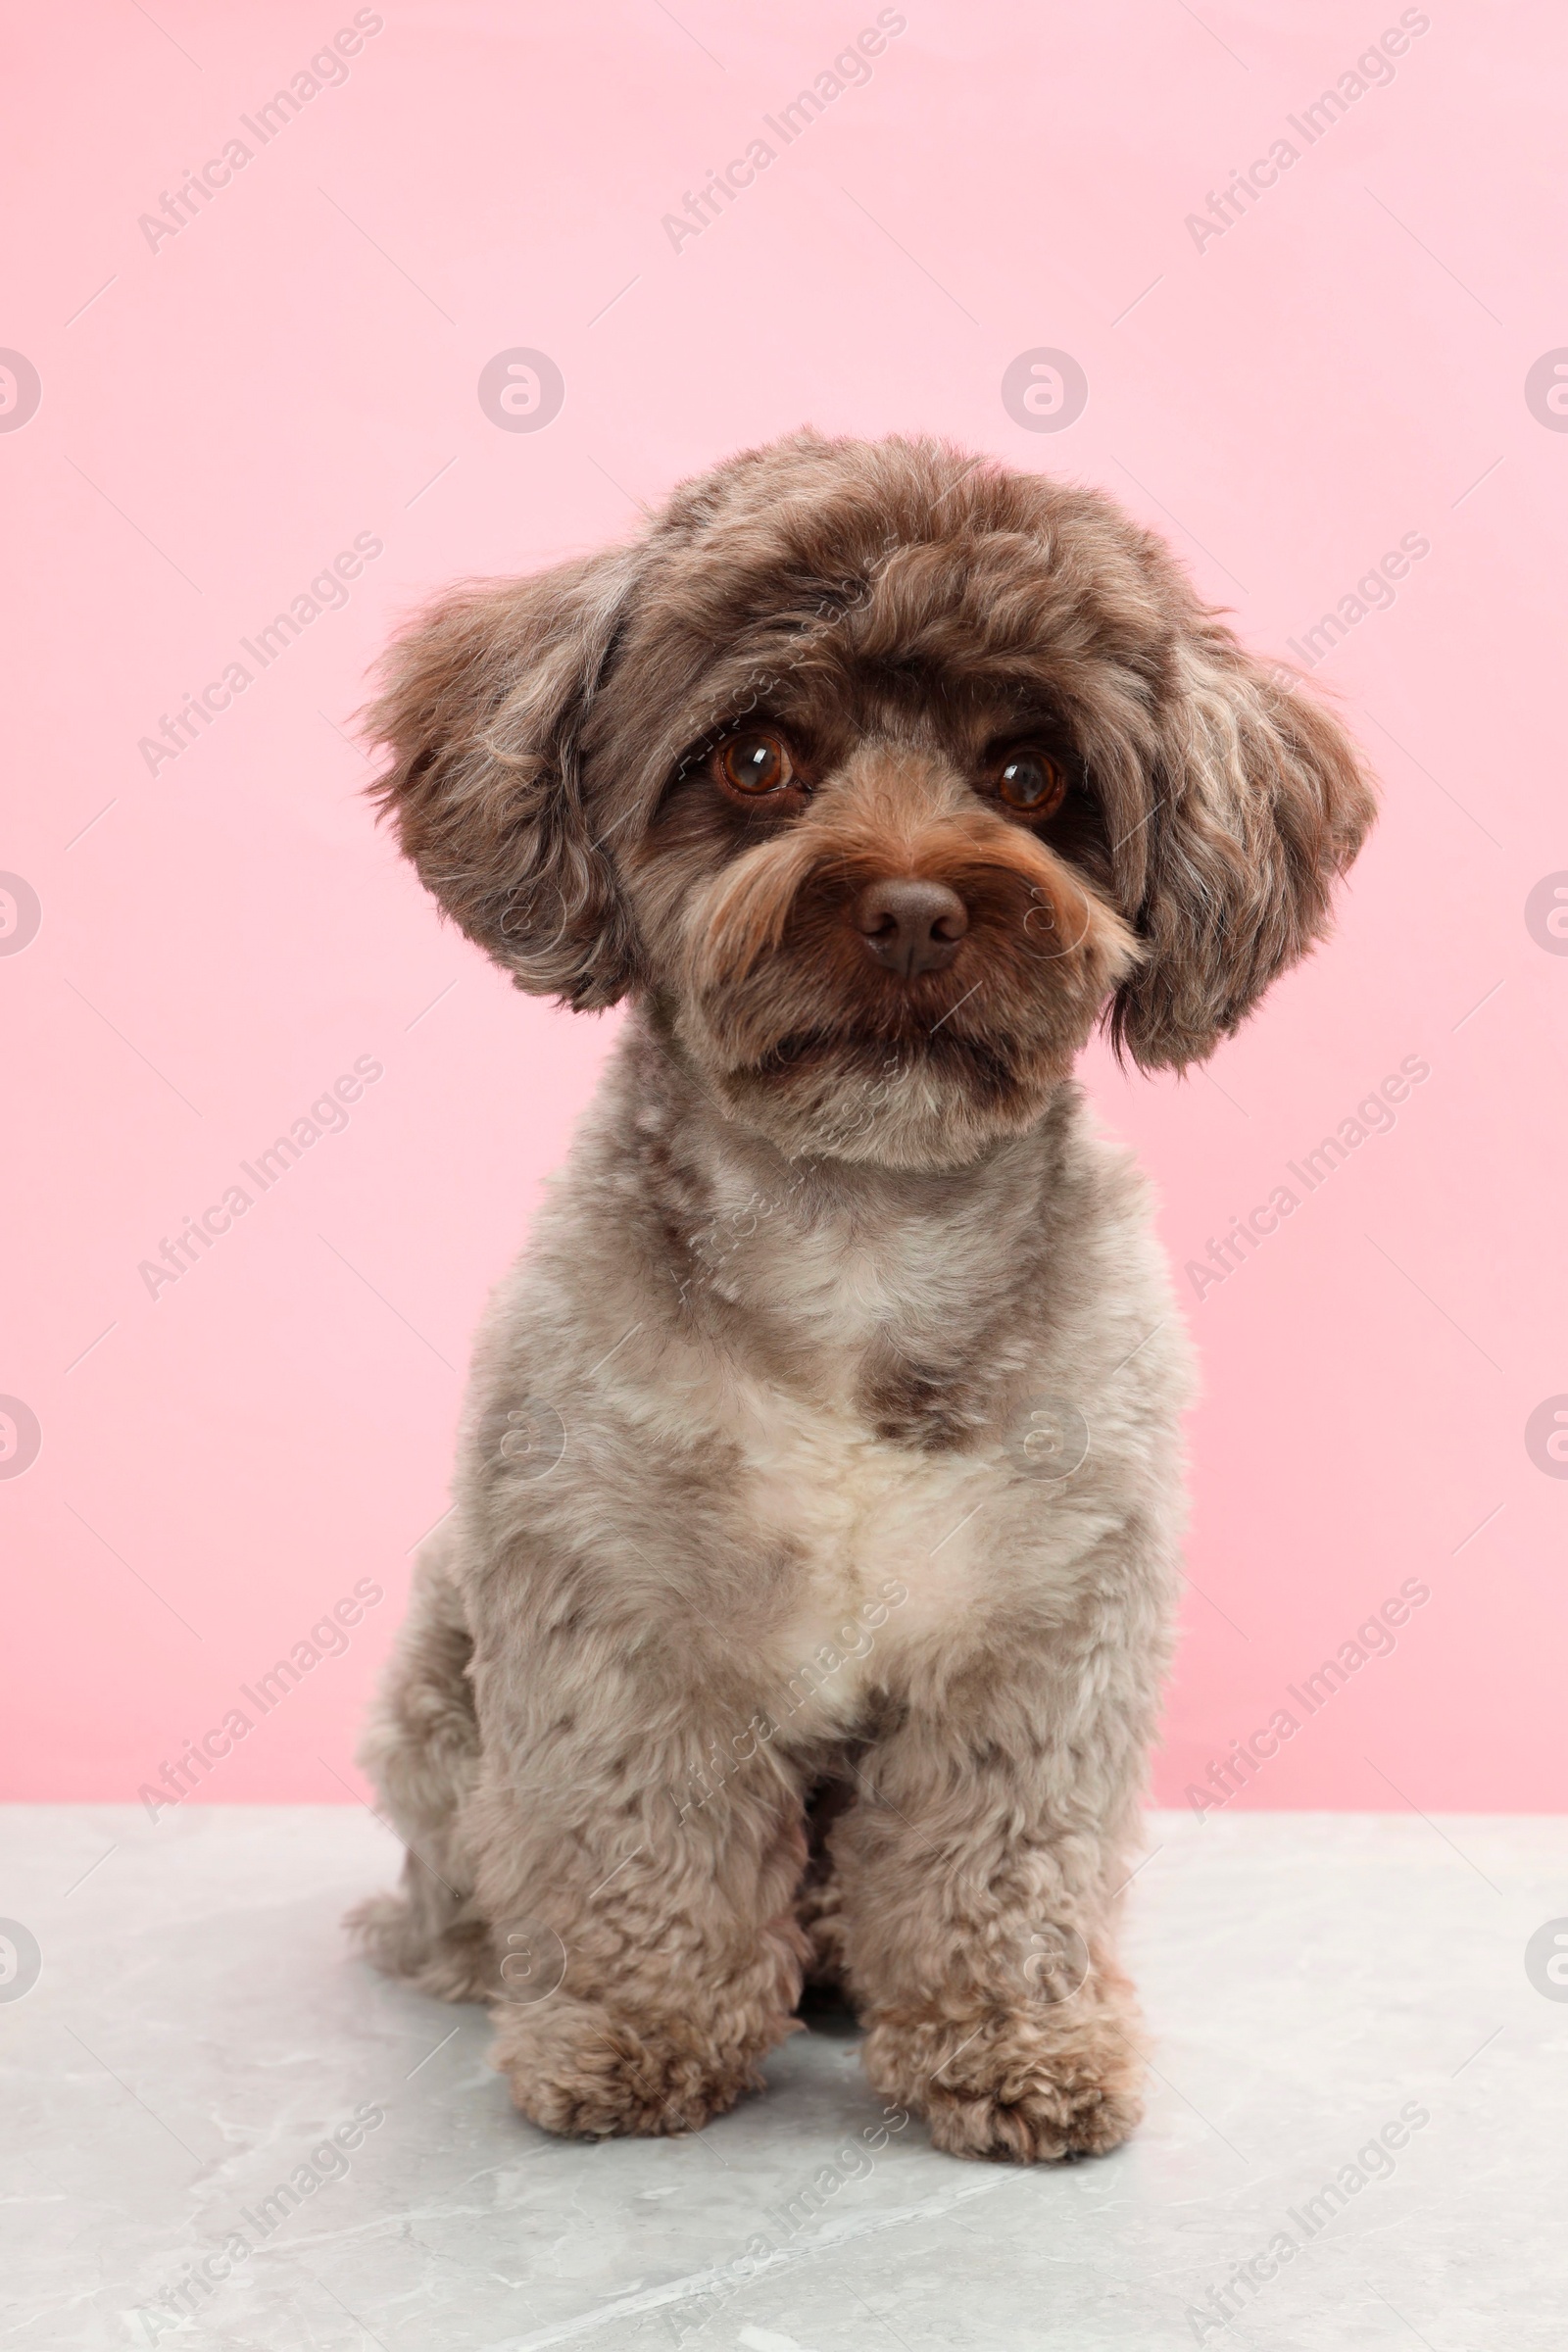 Photo of Cute Maltipoo dog on light grey table against pink background. Lovely pet